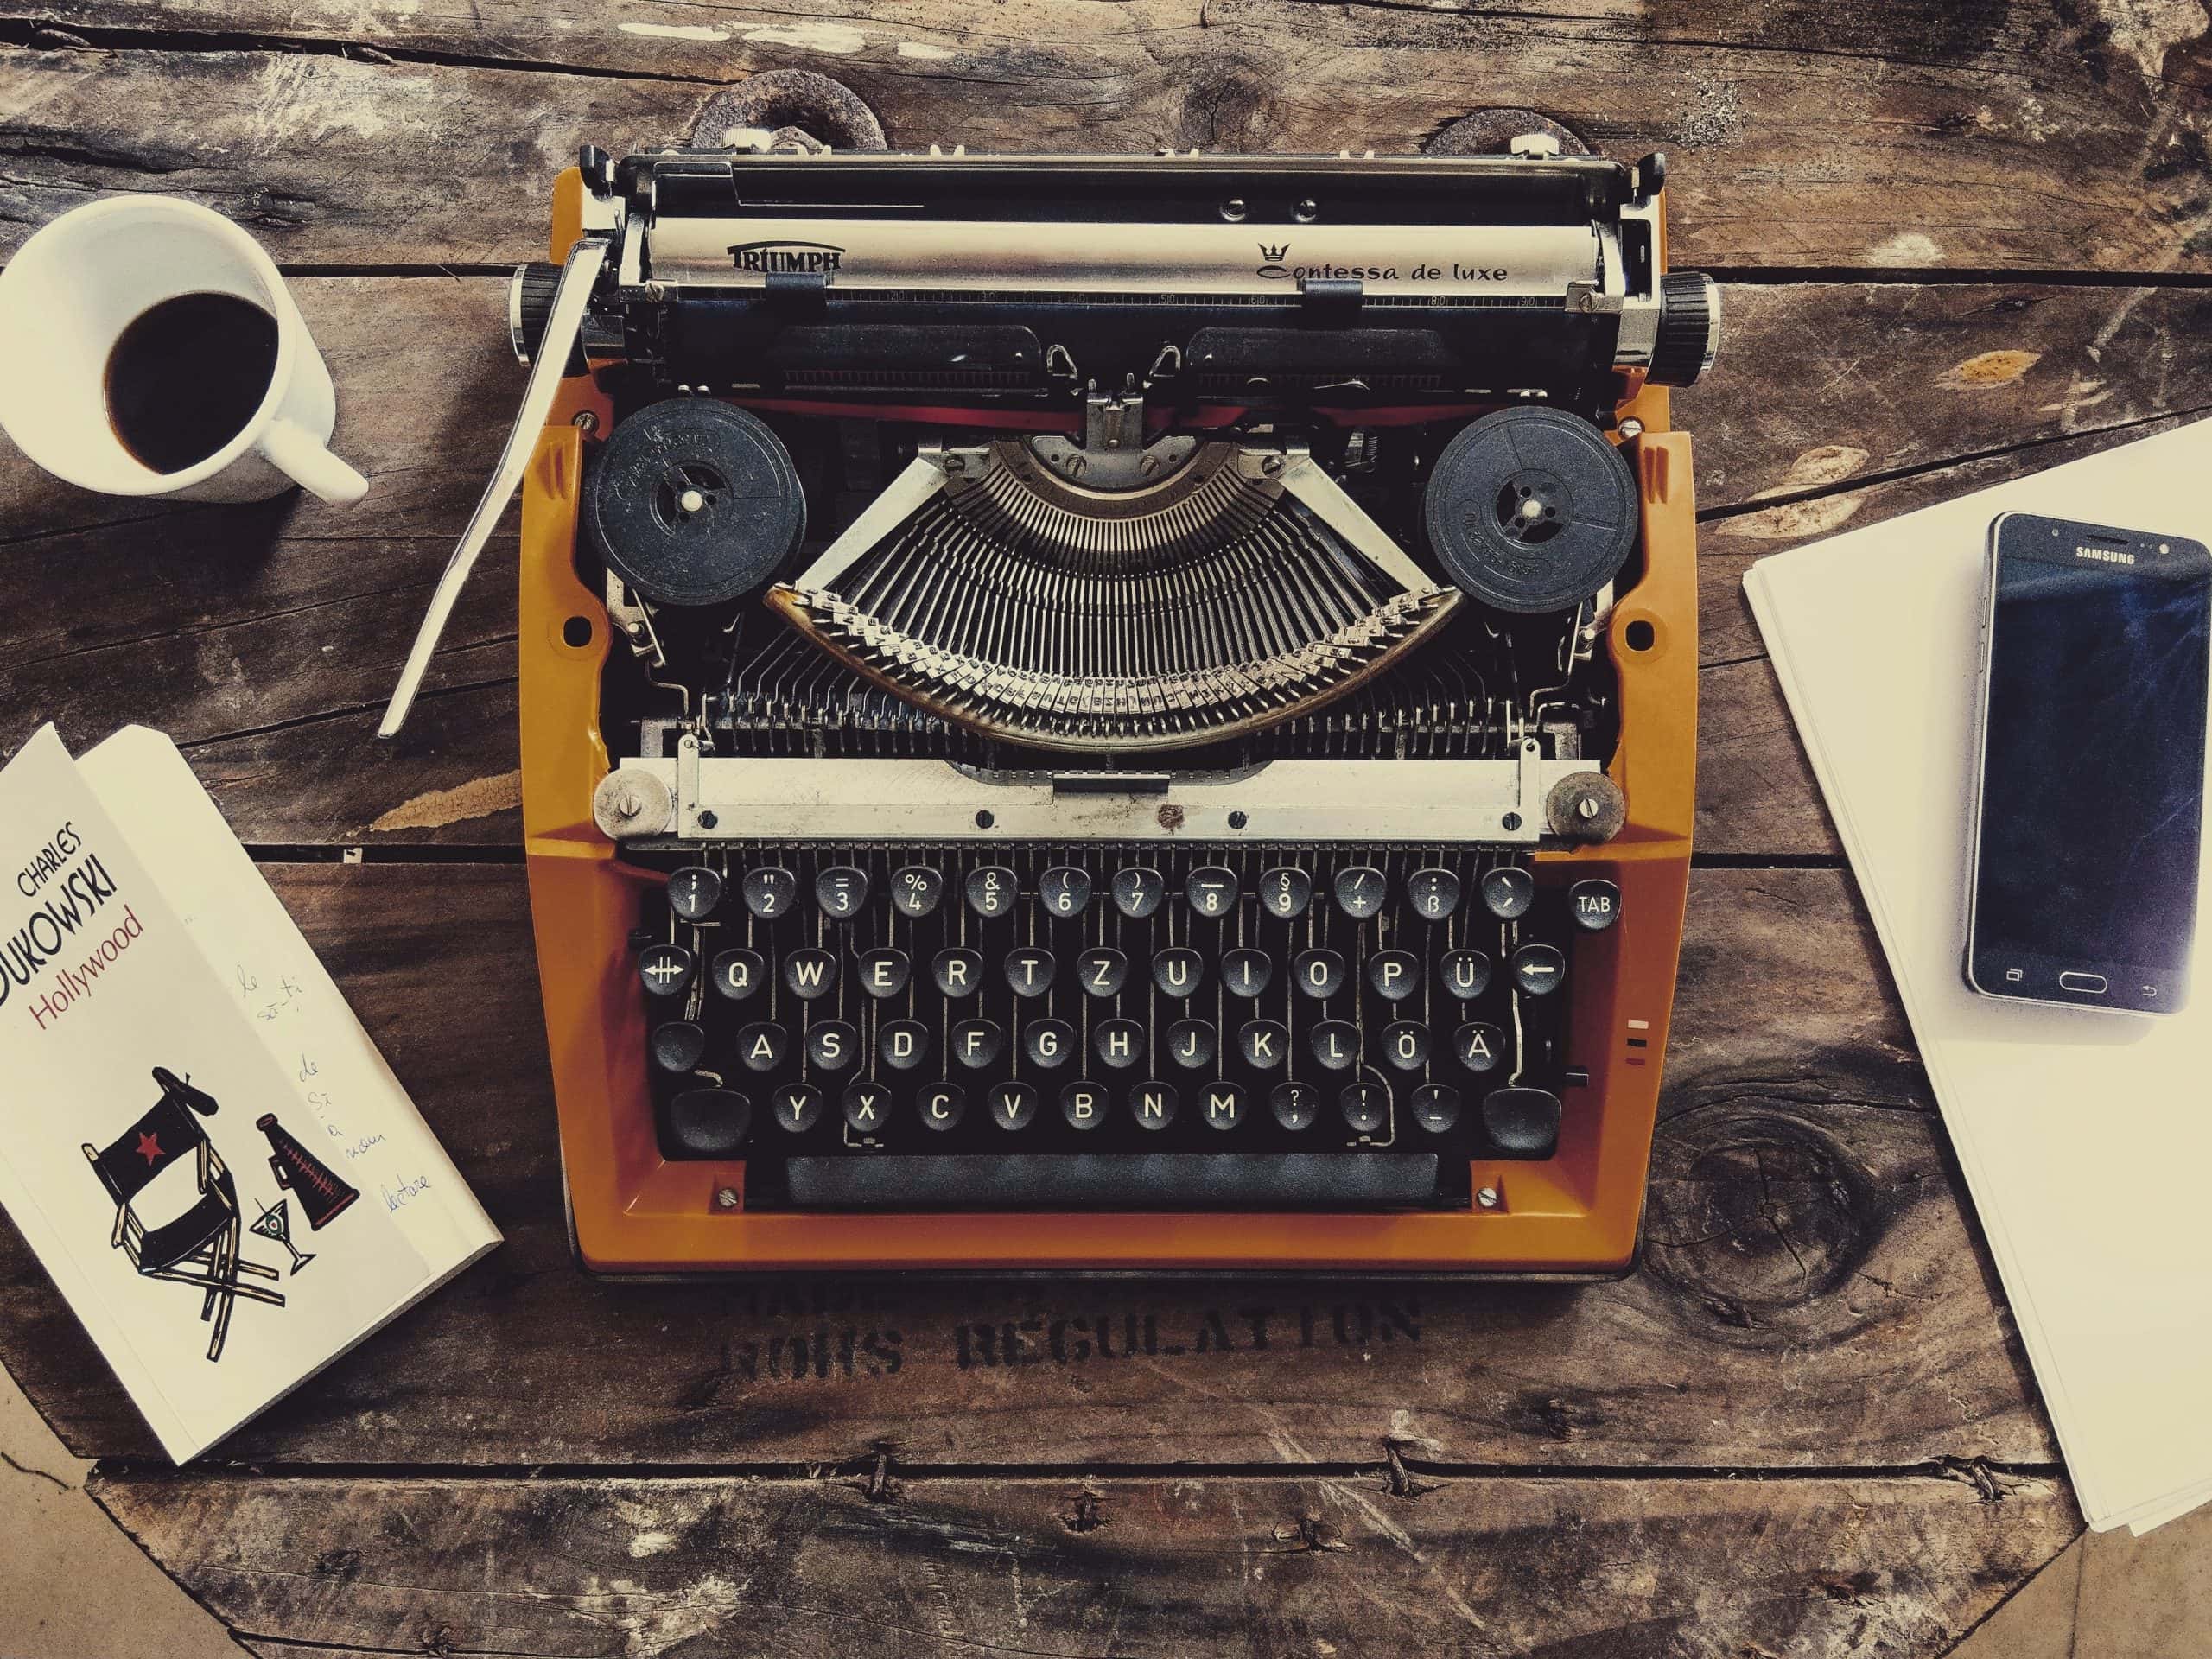 The Best Filmmaking Blogs in 2021 - An image of a typewriter and coffee